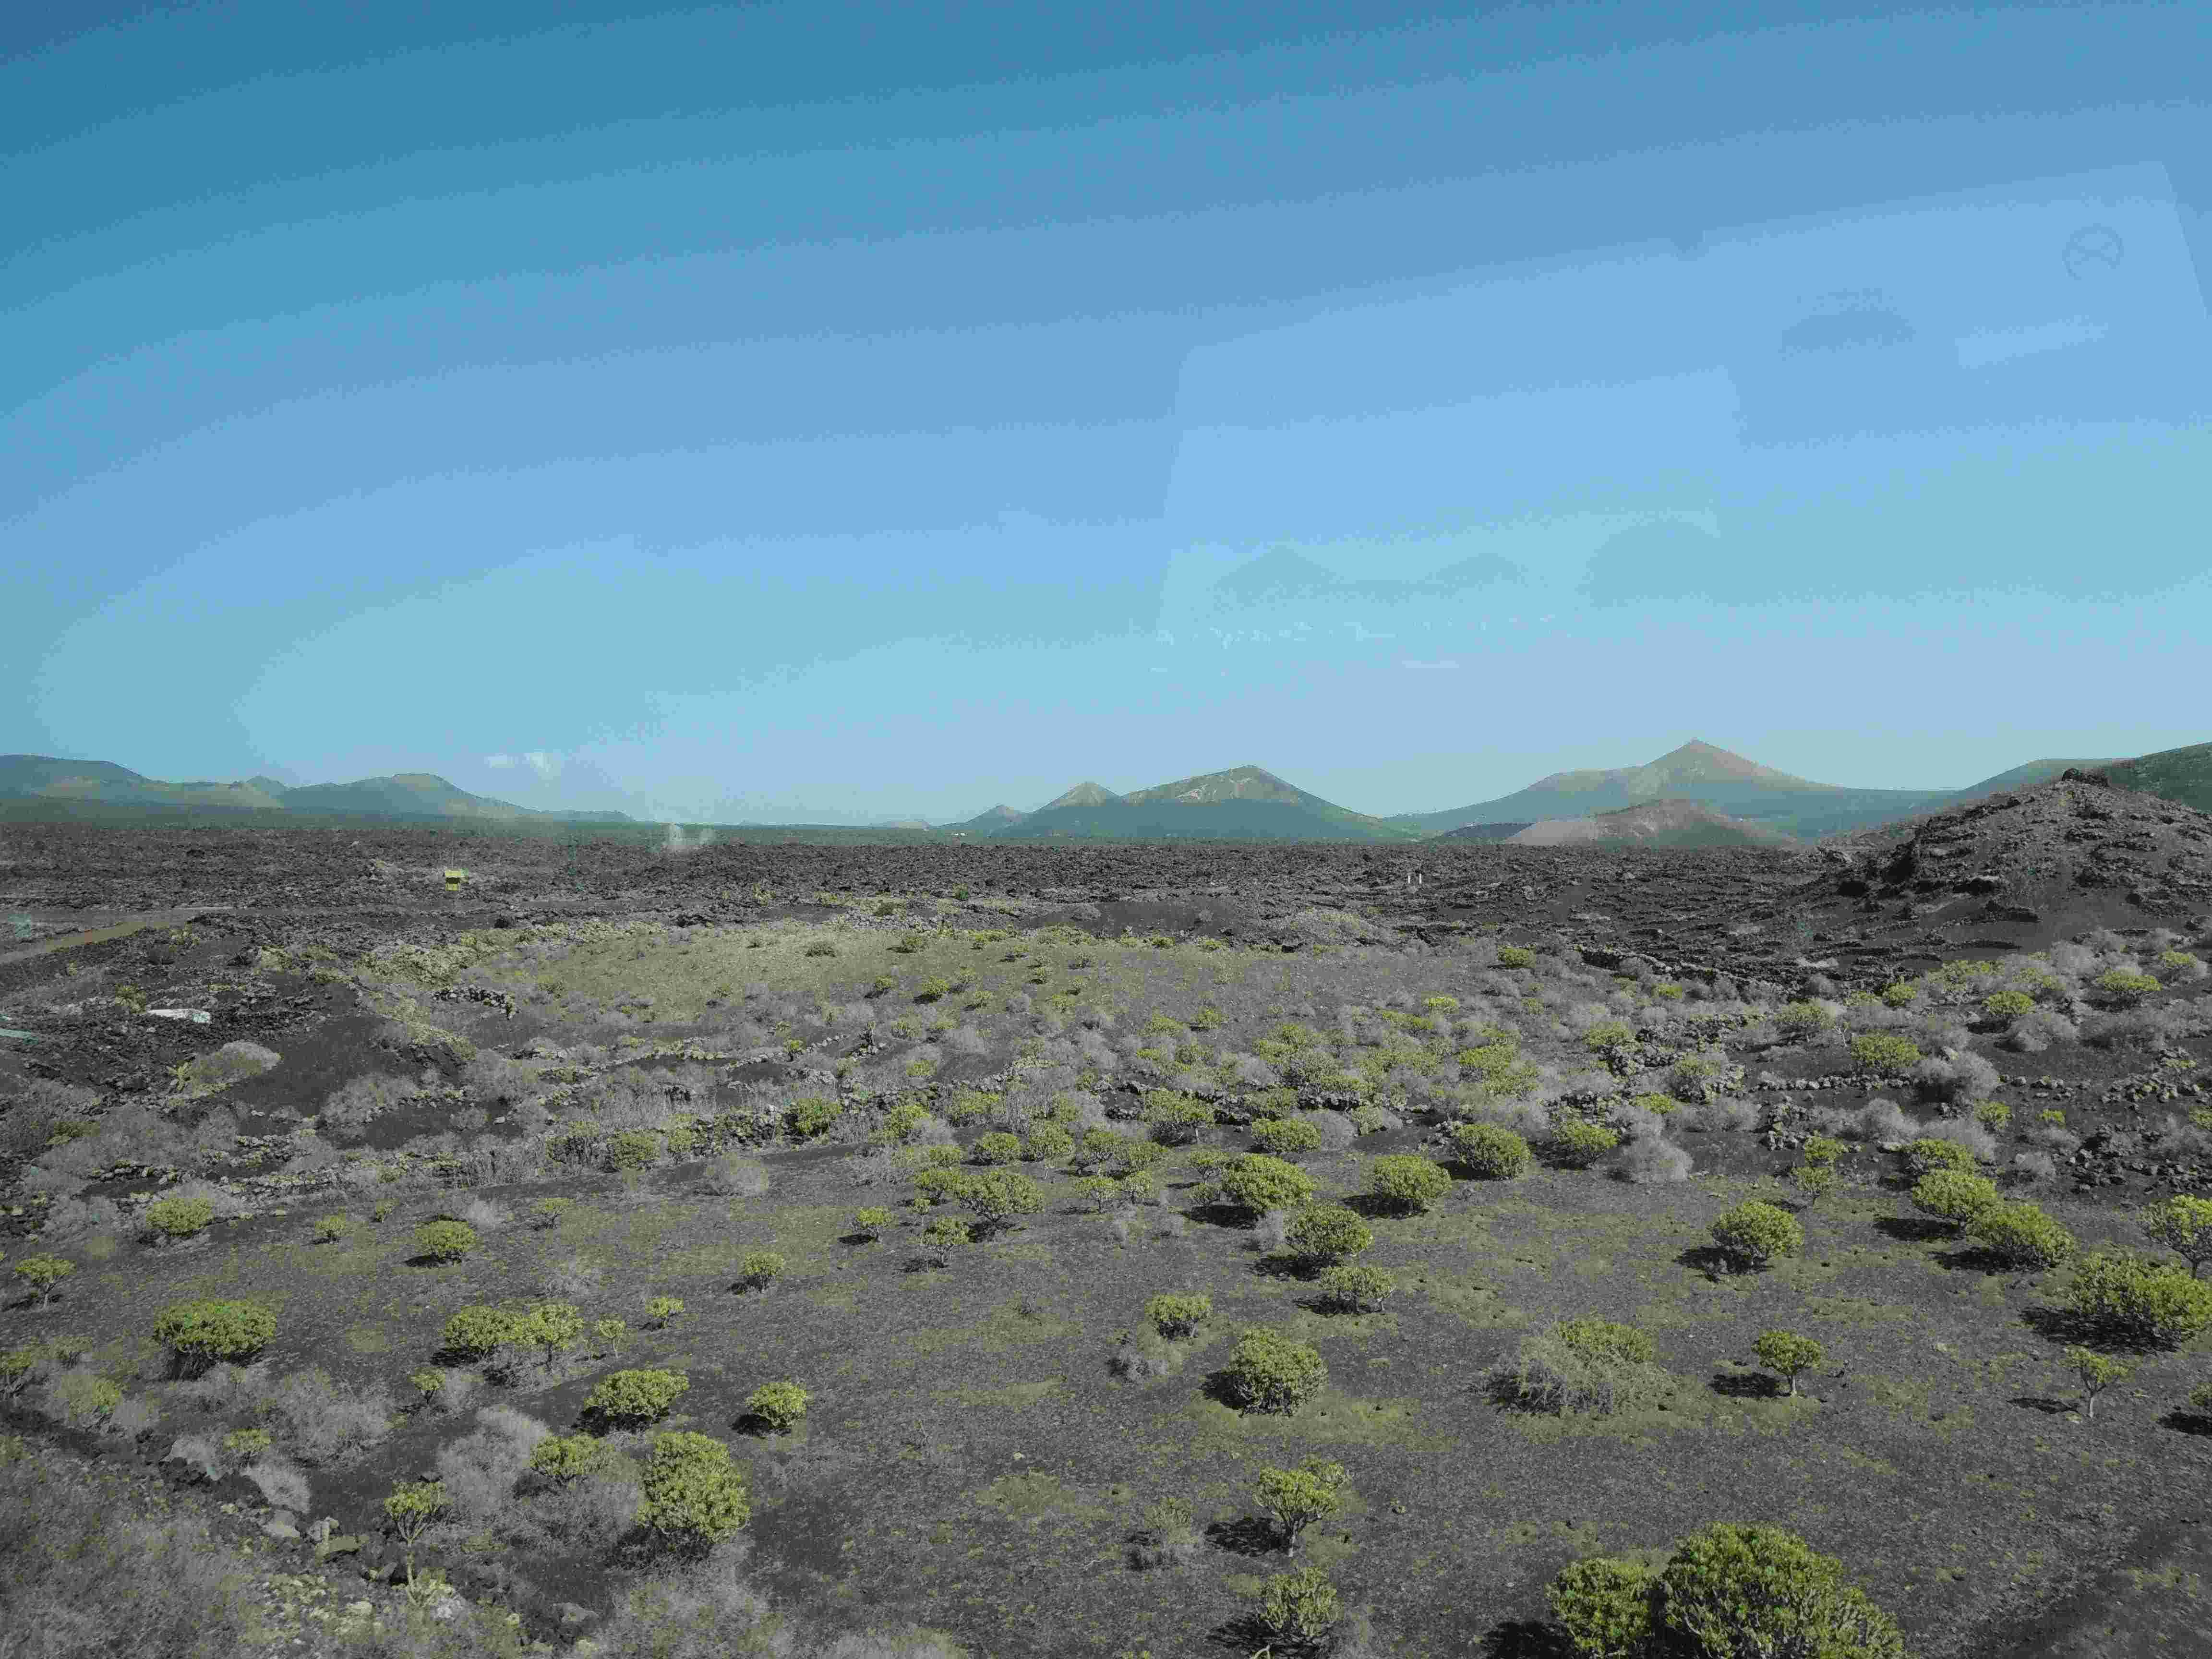 A desert with lots of lava rock and sagebrush